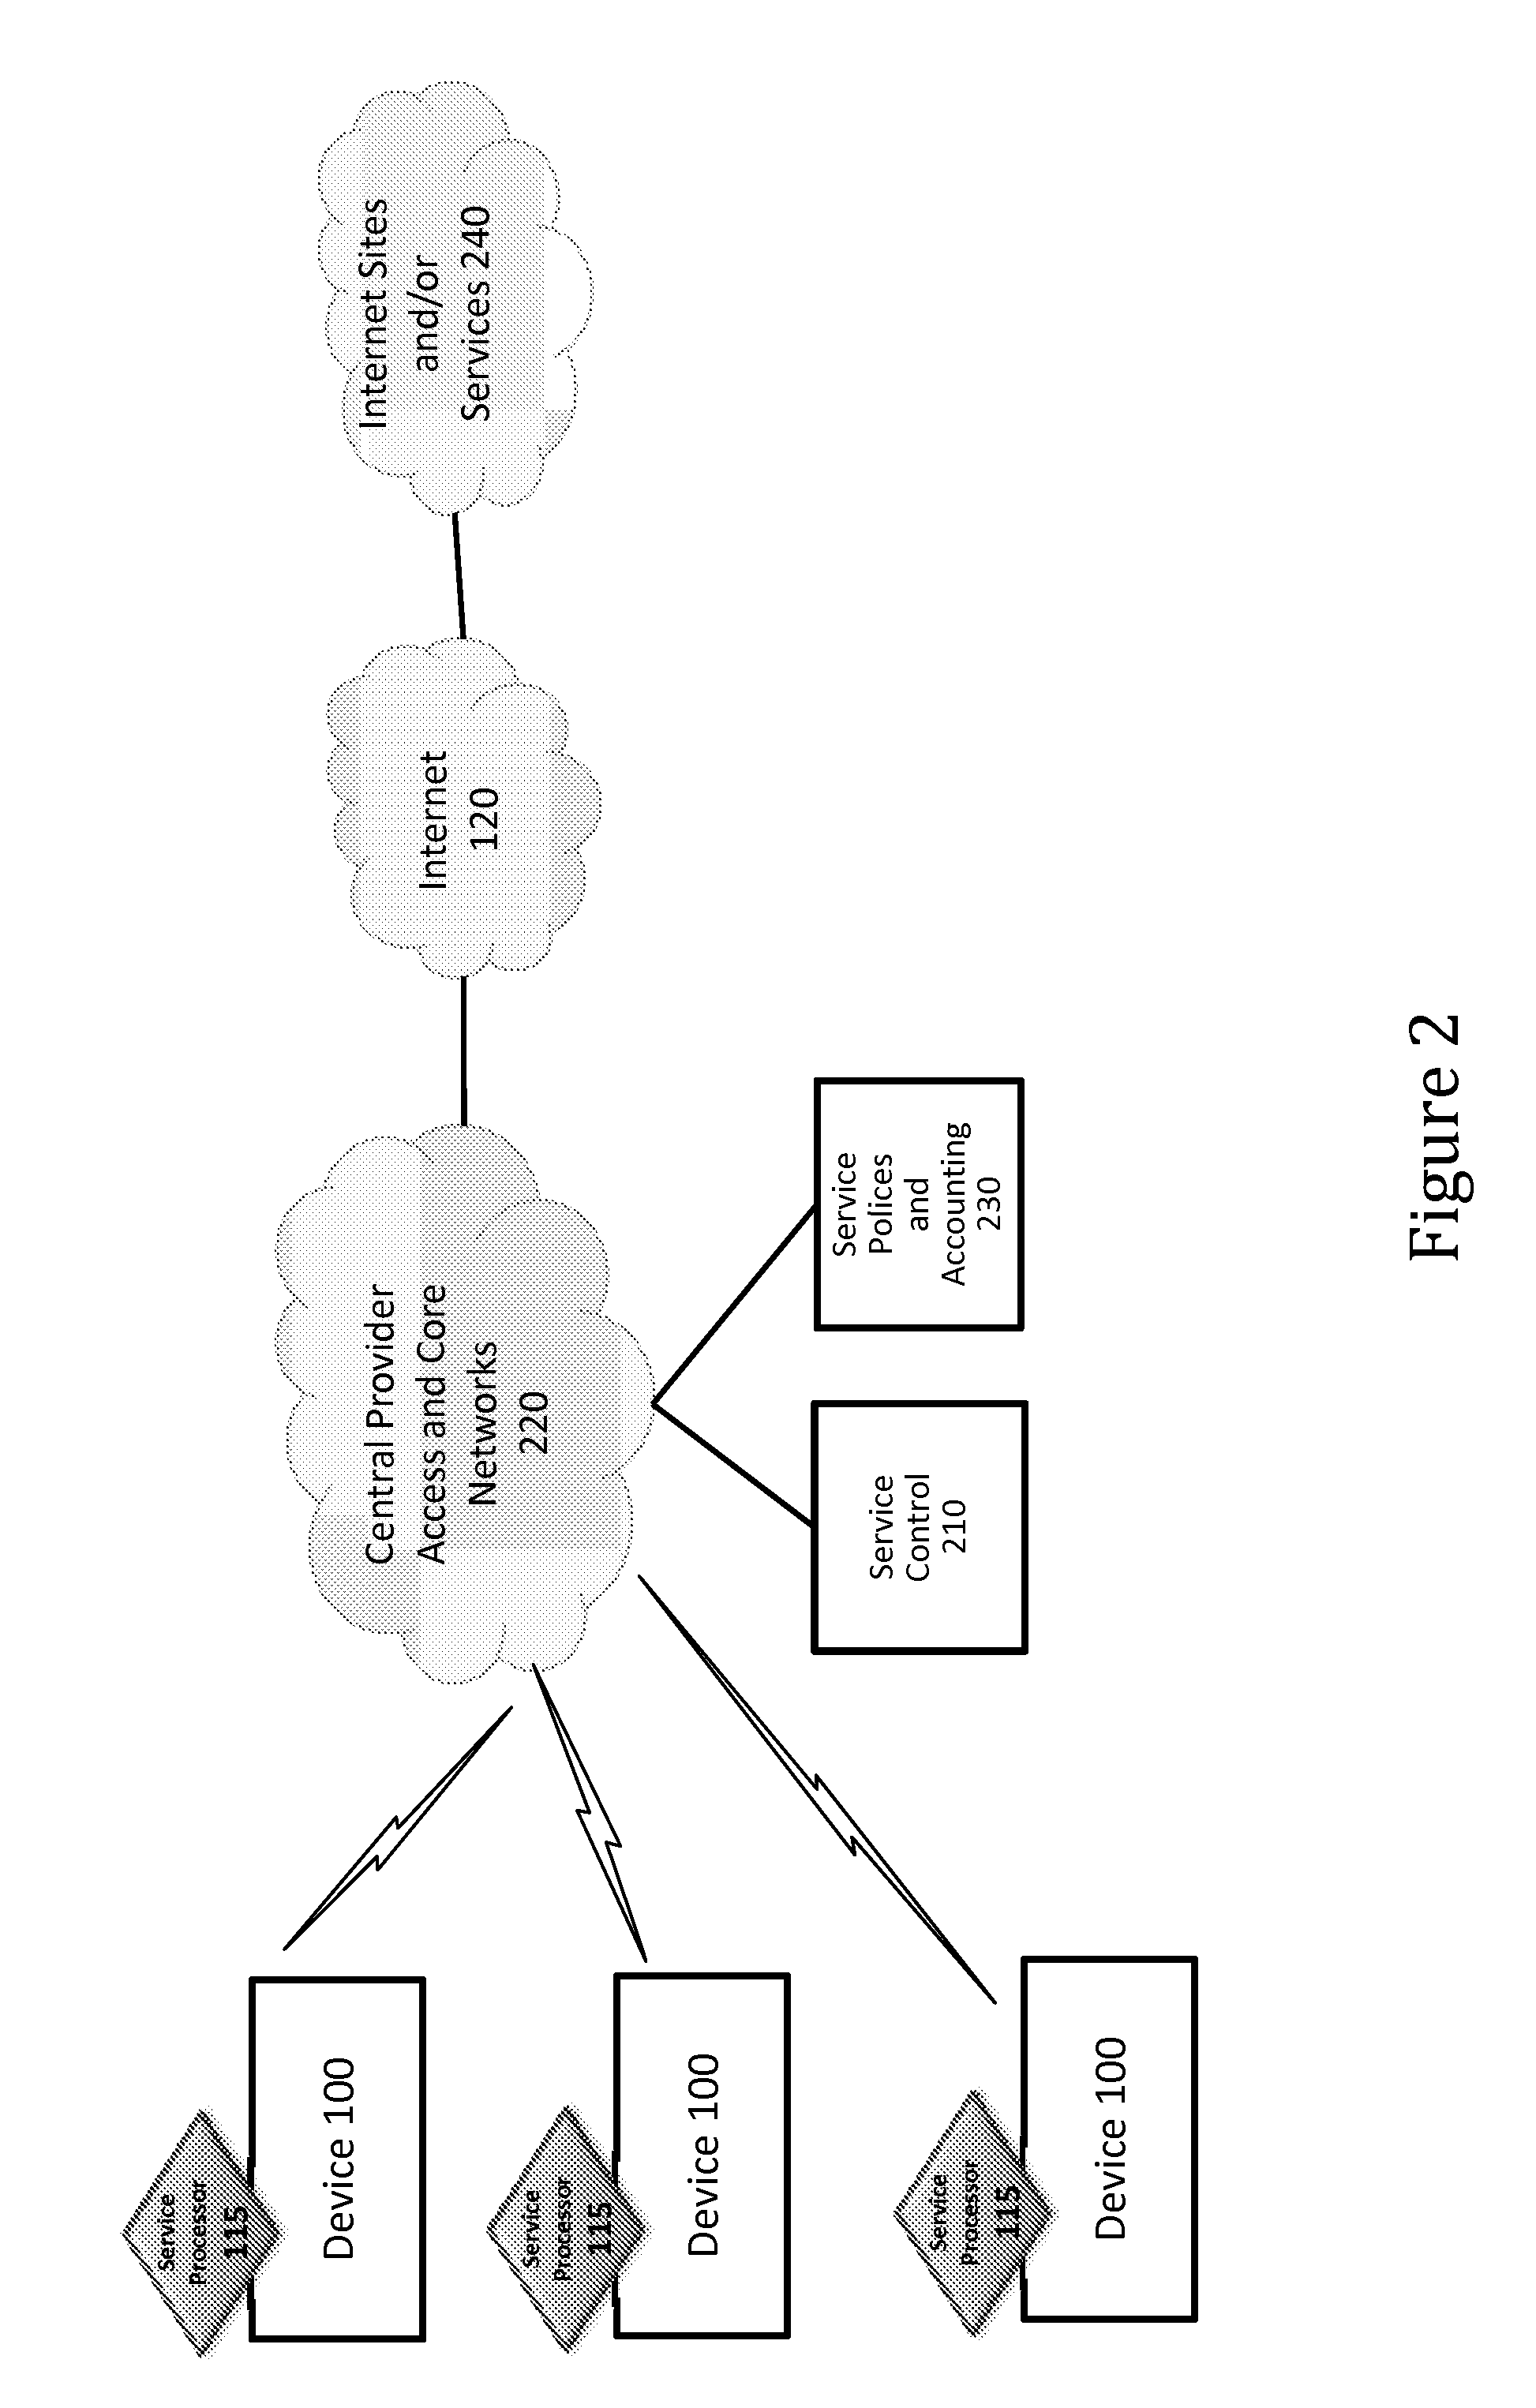 Device group partitions and settlement platform